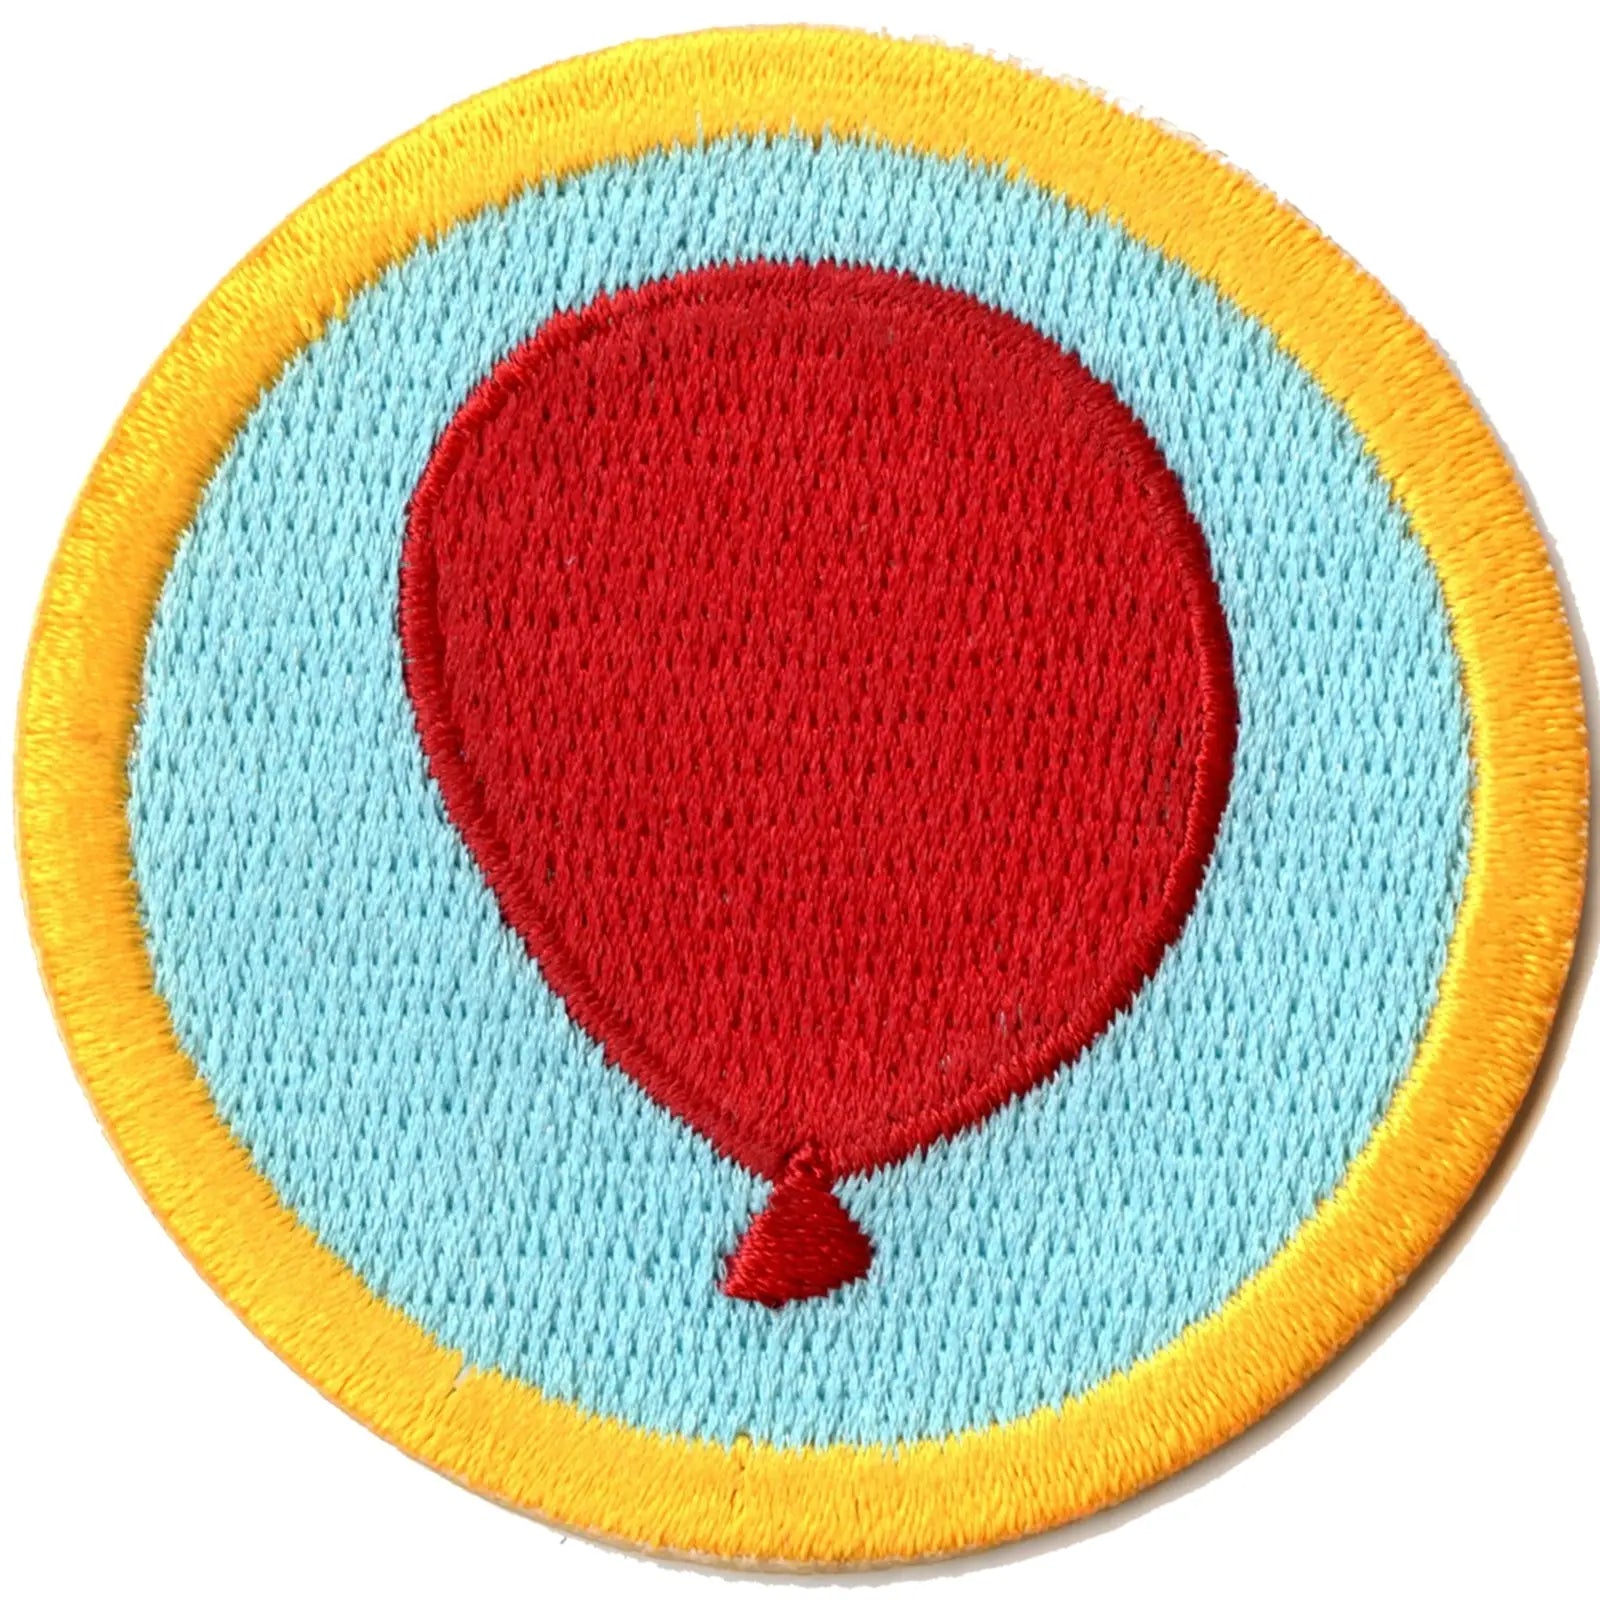 Balloon Tying Merit Badge Embroidered Iron-on Patch 